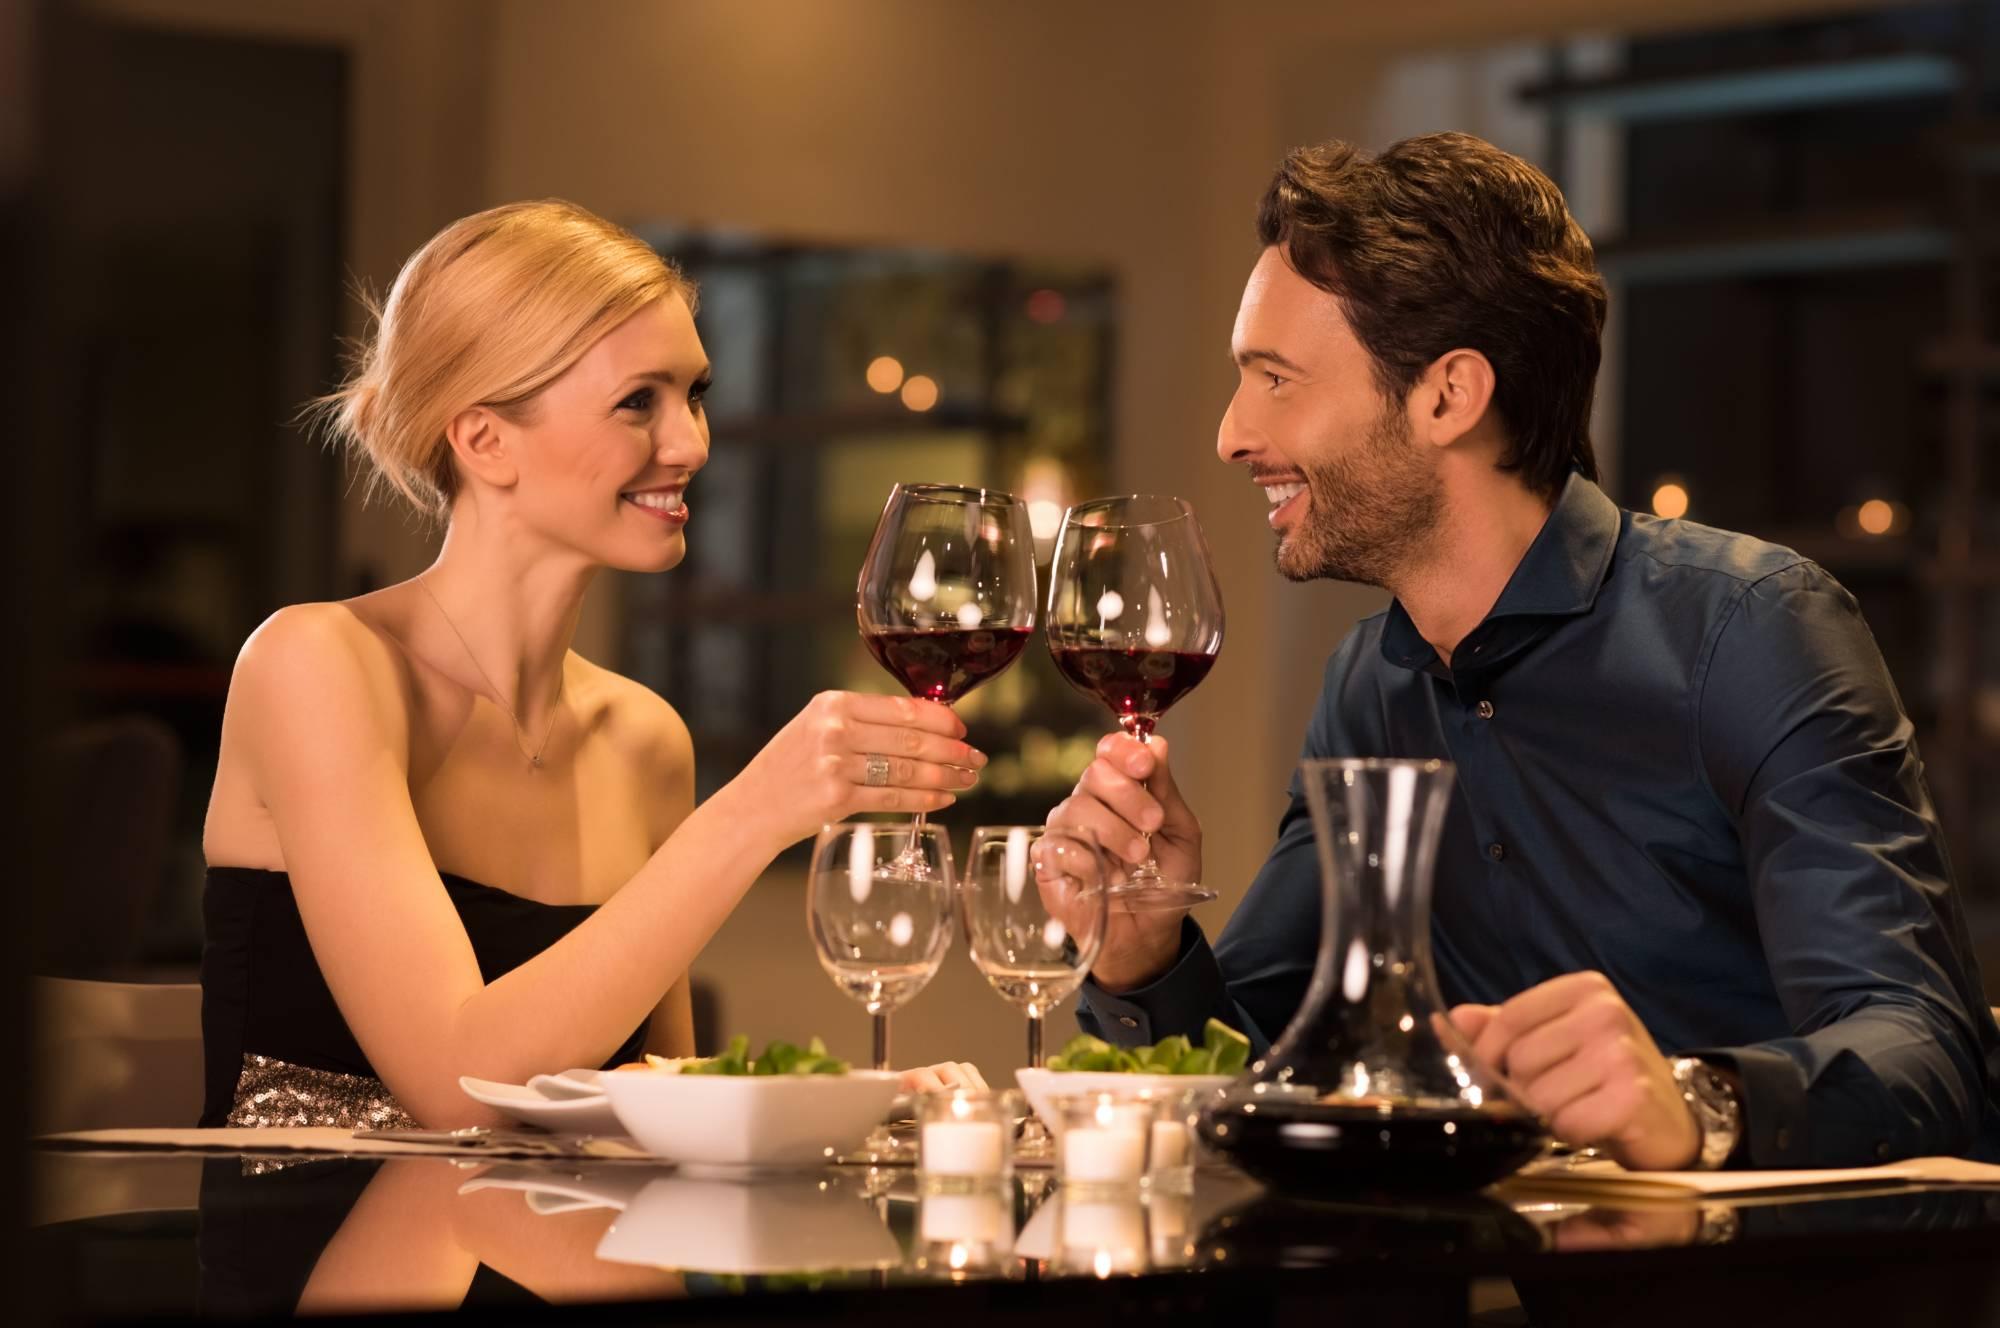 Discover Romantic Dinner Destinations In Abu Dhabi!